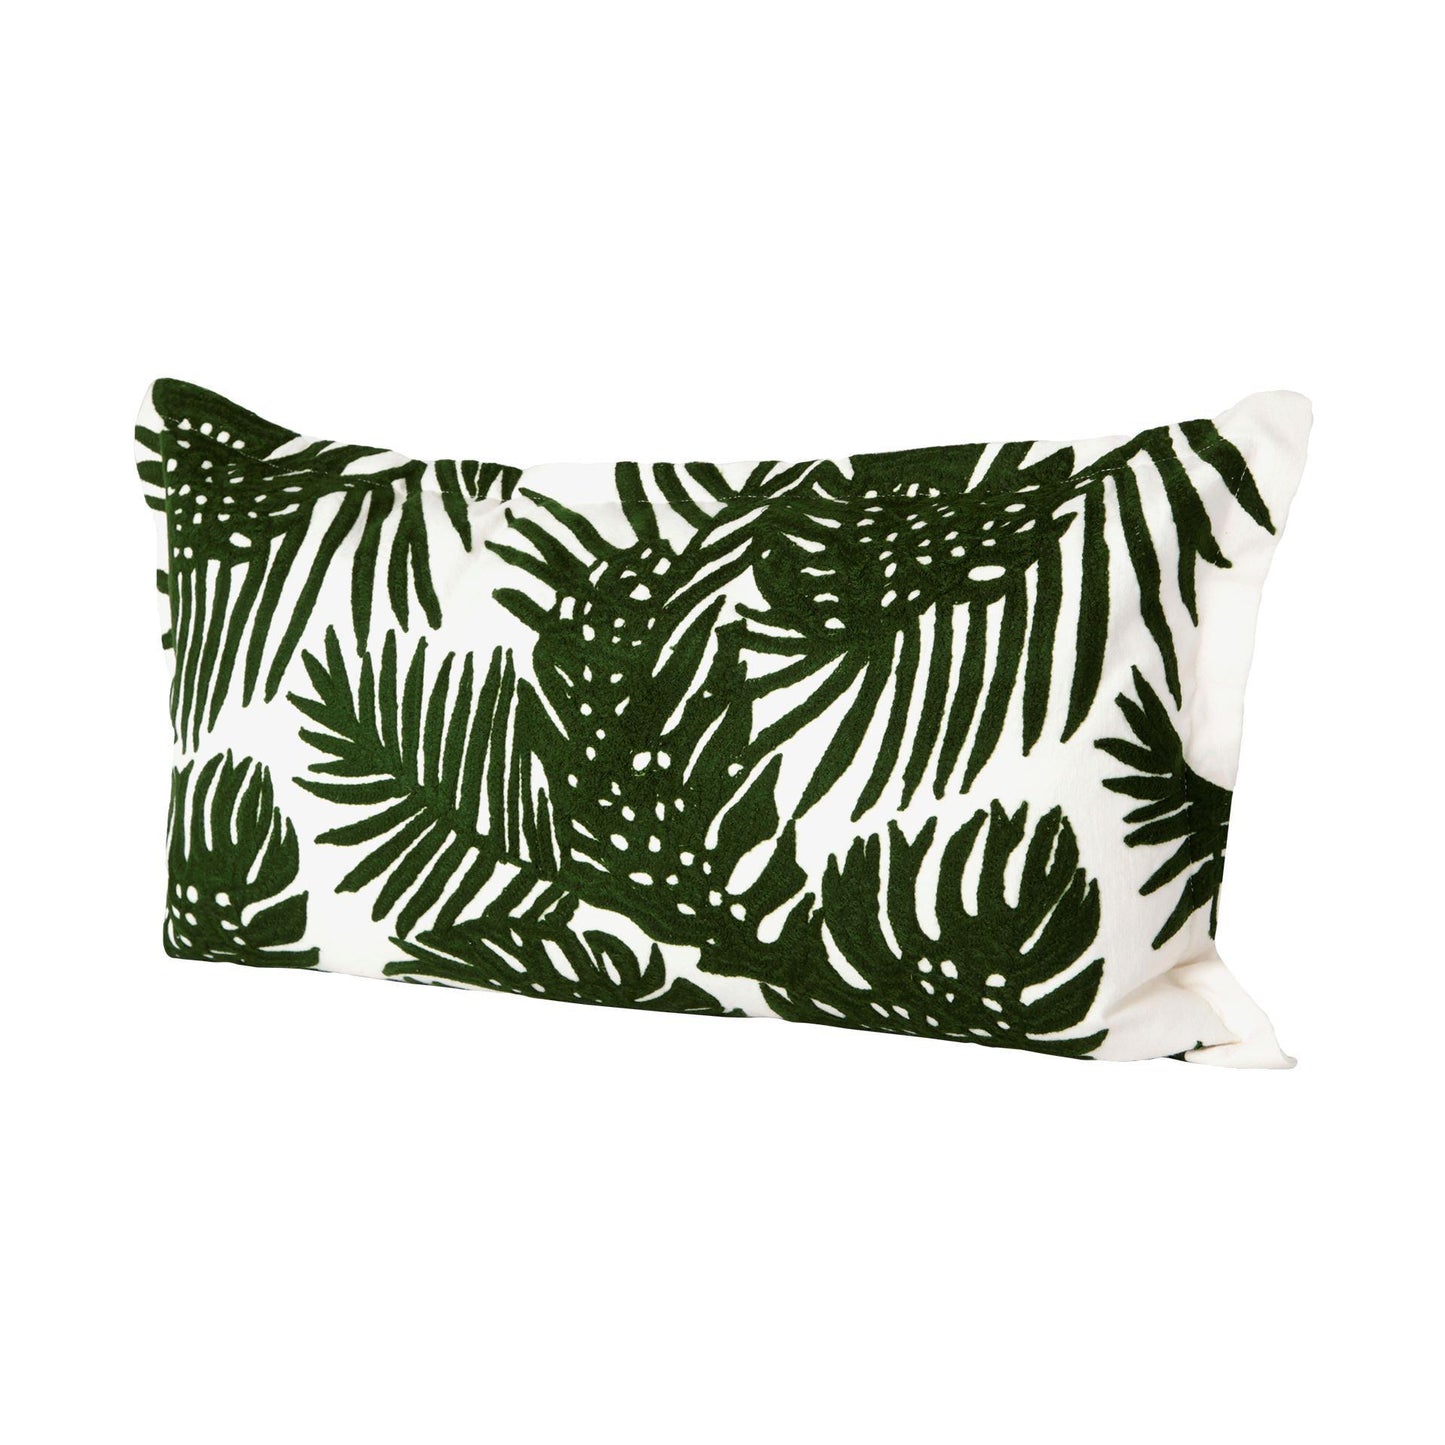 Boyle II 13 x 21 Green Tropical Palm Leaf Decorative Pillow Cover